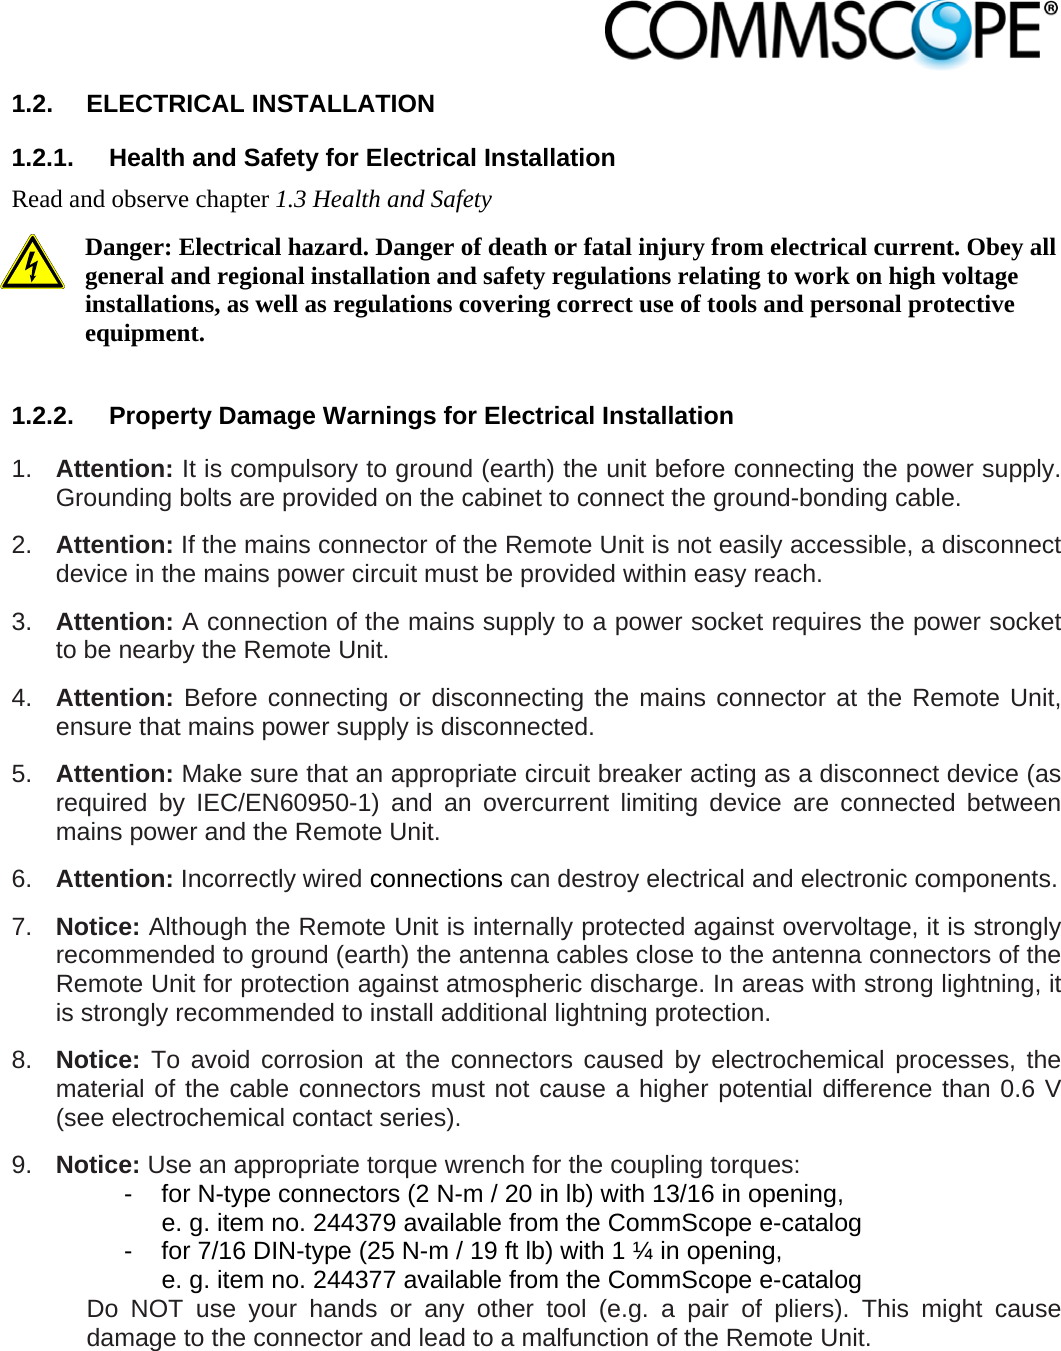                            1.2. ELECTRICAL INSTALLATION 1.2.1.  Health and Safety for Electrical Installation Read and observe chapter 1.3 Health and Safety Danger: Electrical hazard. Danger of death or fatal injury from electrical current. Obey all general and regional installation and safety regulations relating to work on high voltage installations, as well as regulations covering correct use of tools and personal protective equipment.  1.2.2.  Property Damage Warnings for Electrical Installation 1.  Attention: It is compulsory to ground (earth) the unit before connecting the power supply. Grounding bolts are provided on the cabinet to connect the ground-bonding cable.  2.  Attention: If the mains connector of the Remote Unit is not easily accessible, a disconnect device in the mains power circuit must be provided within easy reach. 3.  Attention: A connection of the mains supply to a power socket requires the power socket to be nearby the Remote Unit. 4.  Attention: Before connecting or disconnecting the mains connector at the Remote Unit, ensure that mains power supply is disconnected. 5.  Attention: Make sure that an appropriate circuit breaker acting as a disconnect device (as required by IEC/EN60950-1) and an overcurrent limiting device are connected between mains power and the Remote Unit. 6.  Attention: Incorrectly wired connections can destroy electrical and electronic components.  7.  Notice: Although the Remote Unit is internally protected against overvoltage, it is strongly recommended to ground (earth) the antenna cables close to the antenna connectors of the Remote Unit for protection against atmospheric discharge. In areas with strong lightning, it is strongly recommended to install additional lightning protection. 8.  Notice: To avoid corrosion at the connectors caused by electrochemical processes, the material of the cable connectors must not cause a higher potential difference than 0.6 V (see electrochemical contact series). 9.  Notice: Use an appropriate torque wrench for the coupling torques:   -  for N-type connectors (2 N-m / 20 in lb) with 13/16 in opening,      e. g. item no. 244379 available from the CommScope e-catalog   -  for 7/16 DIN-type (25 N-m / 19 ft lb) with 1 ¼ in opening,      e. g. item no. 244377 available from the CommScope e-catalog Do NOT use your hands or any other tool (e.g. a pair of pliers). This might cause damage to the connector and lead to a malfunction of the Remote Unit. 